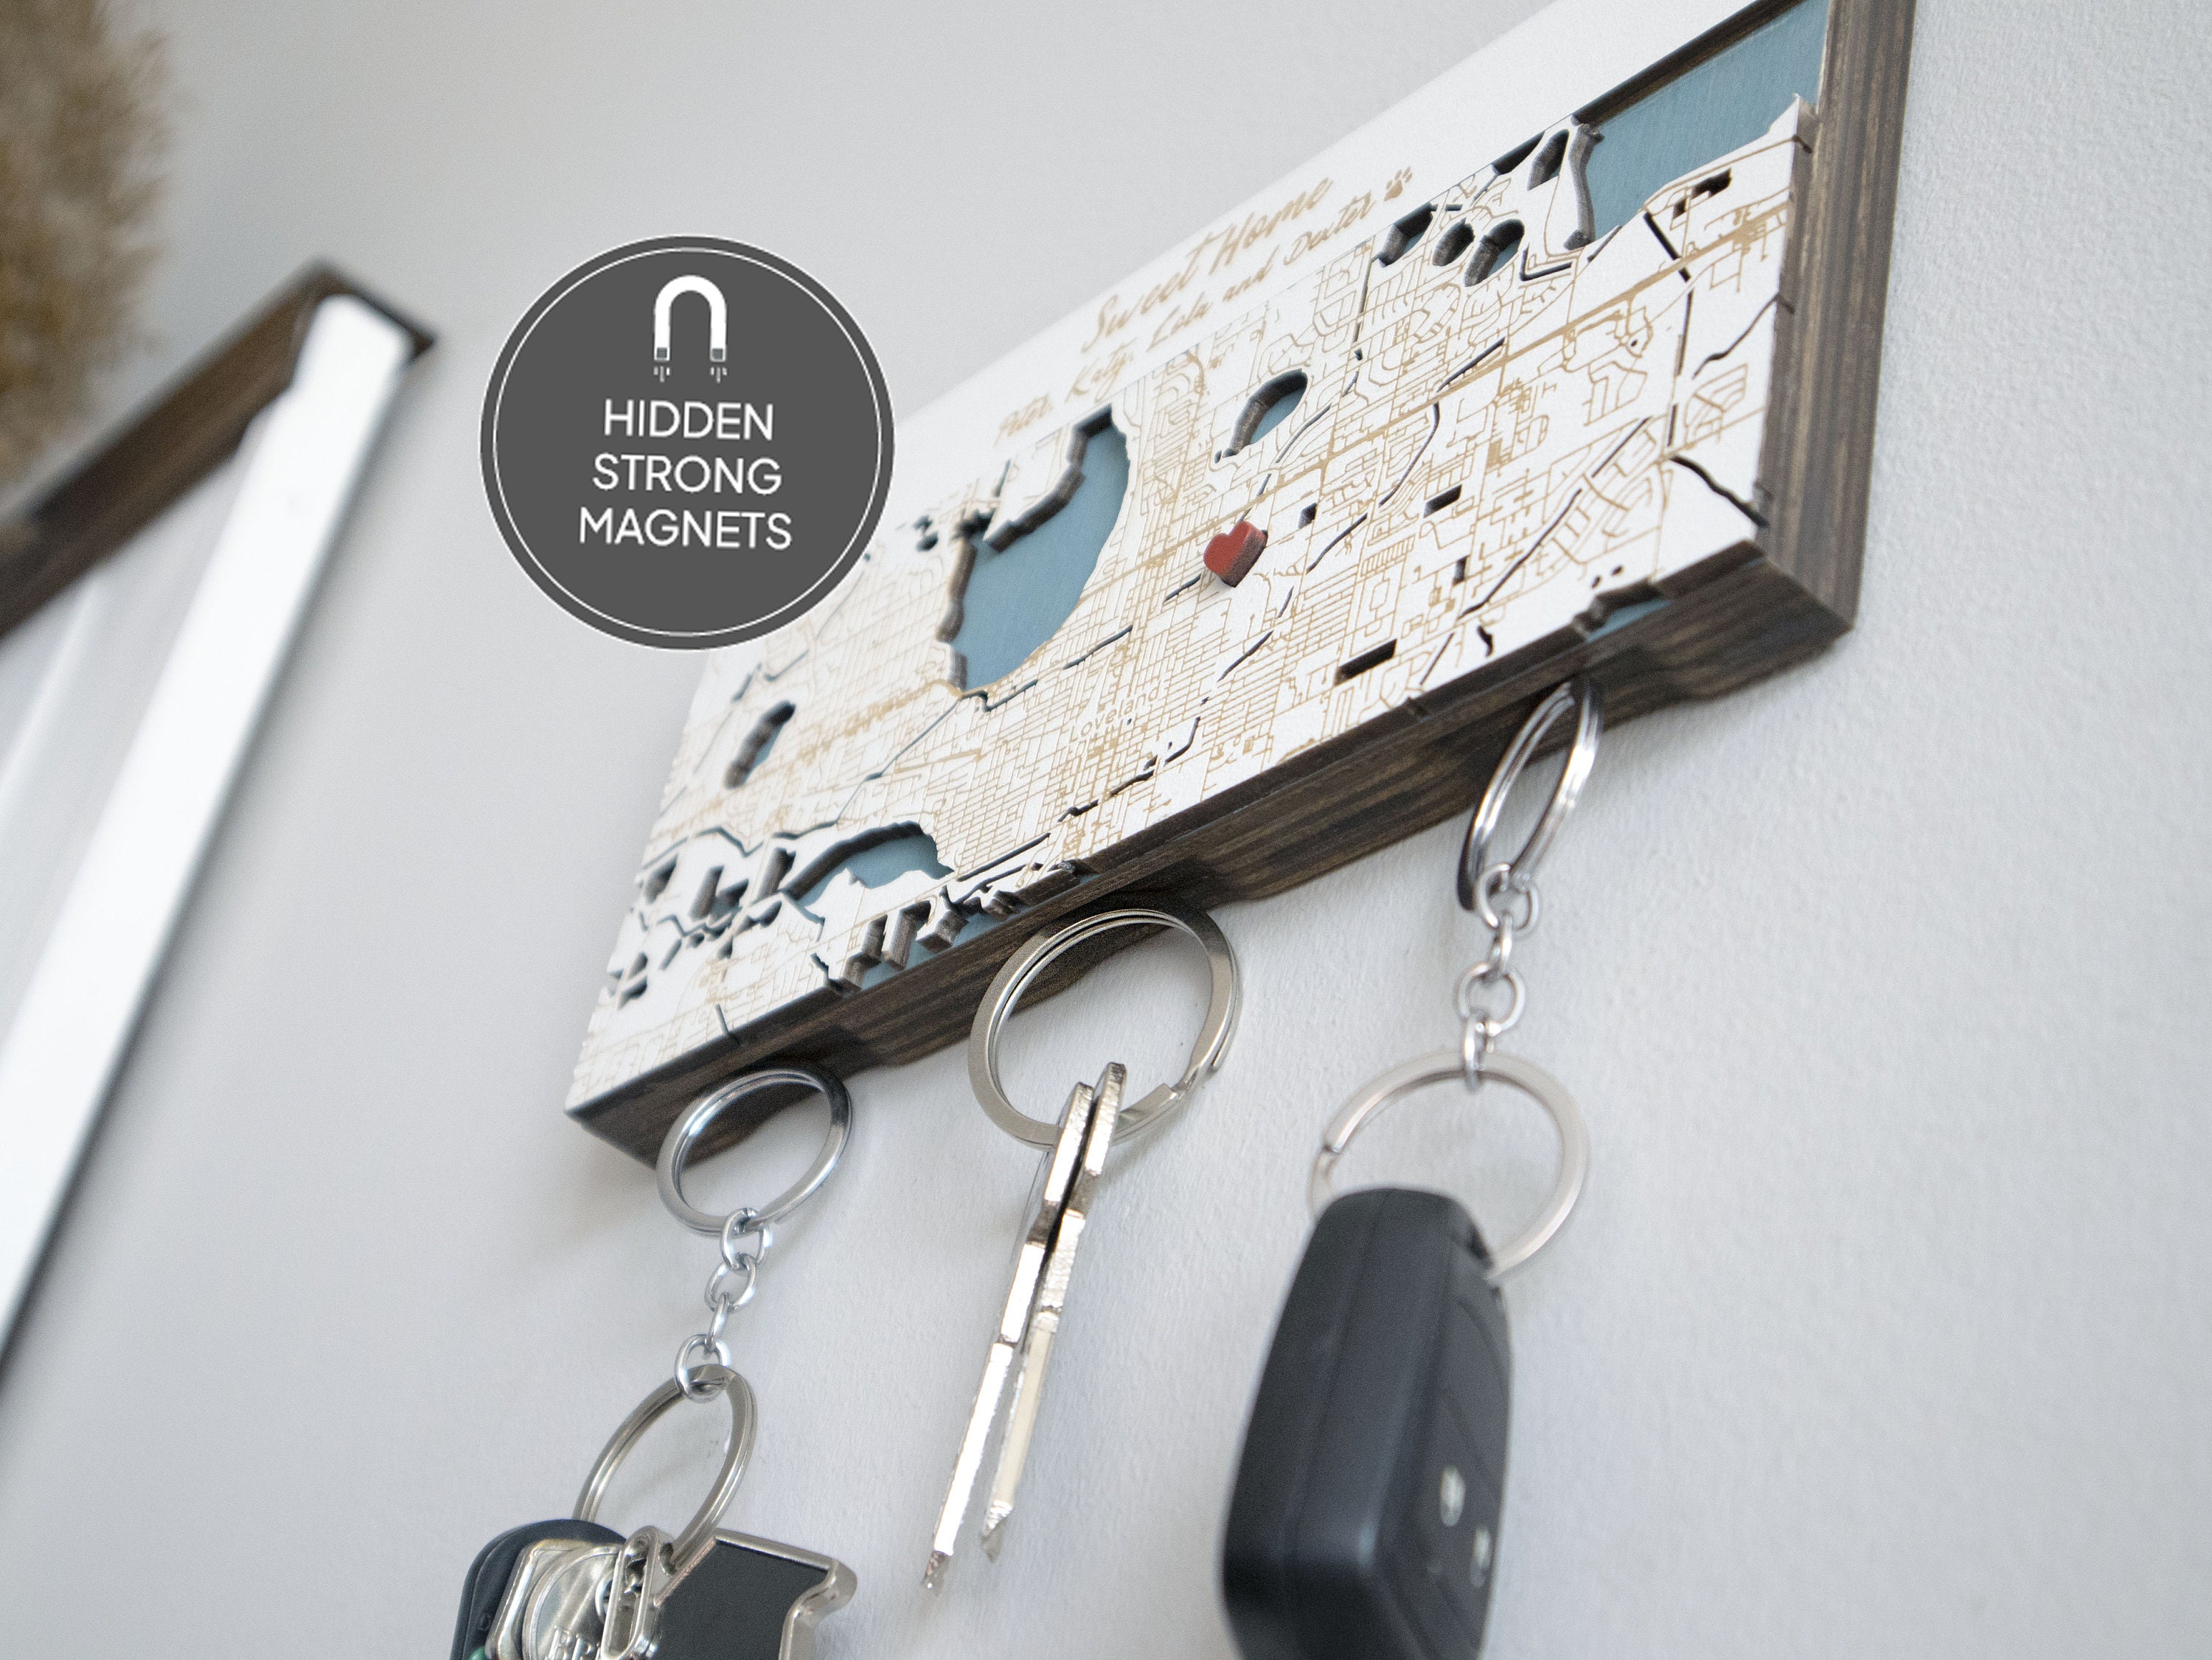  DAUH Magnetic Key Holder, Key Holder for Wall, Magnetic Key  Hangers with 3 Key Rings, Home Solid Wood Key Holder for Wall Decoration  Hallway Kitchen Office（2 Types of Installation） : Home